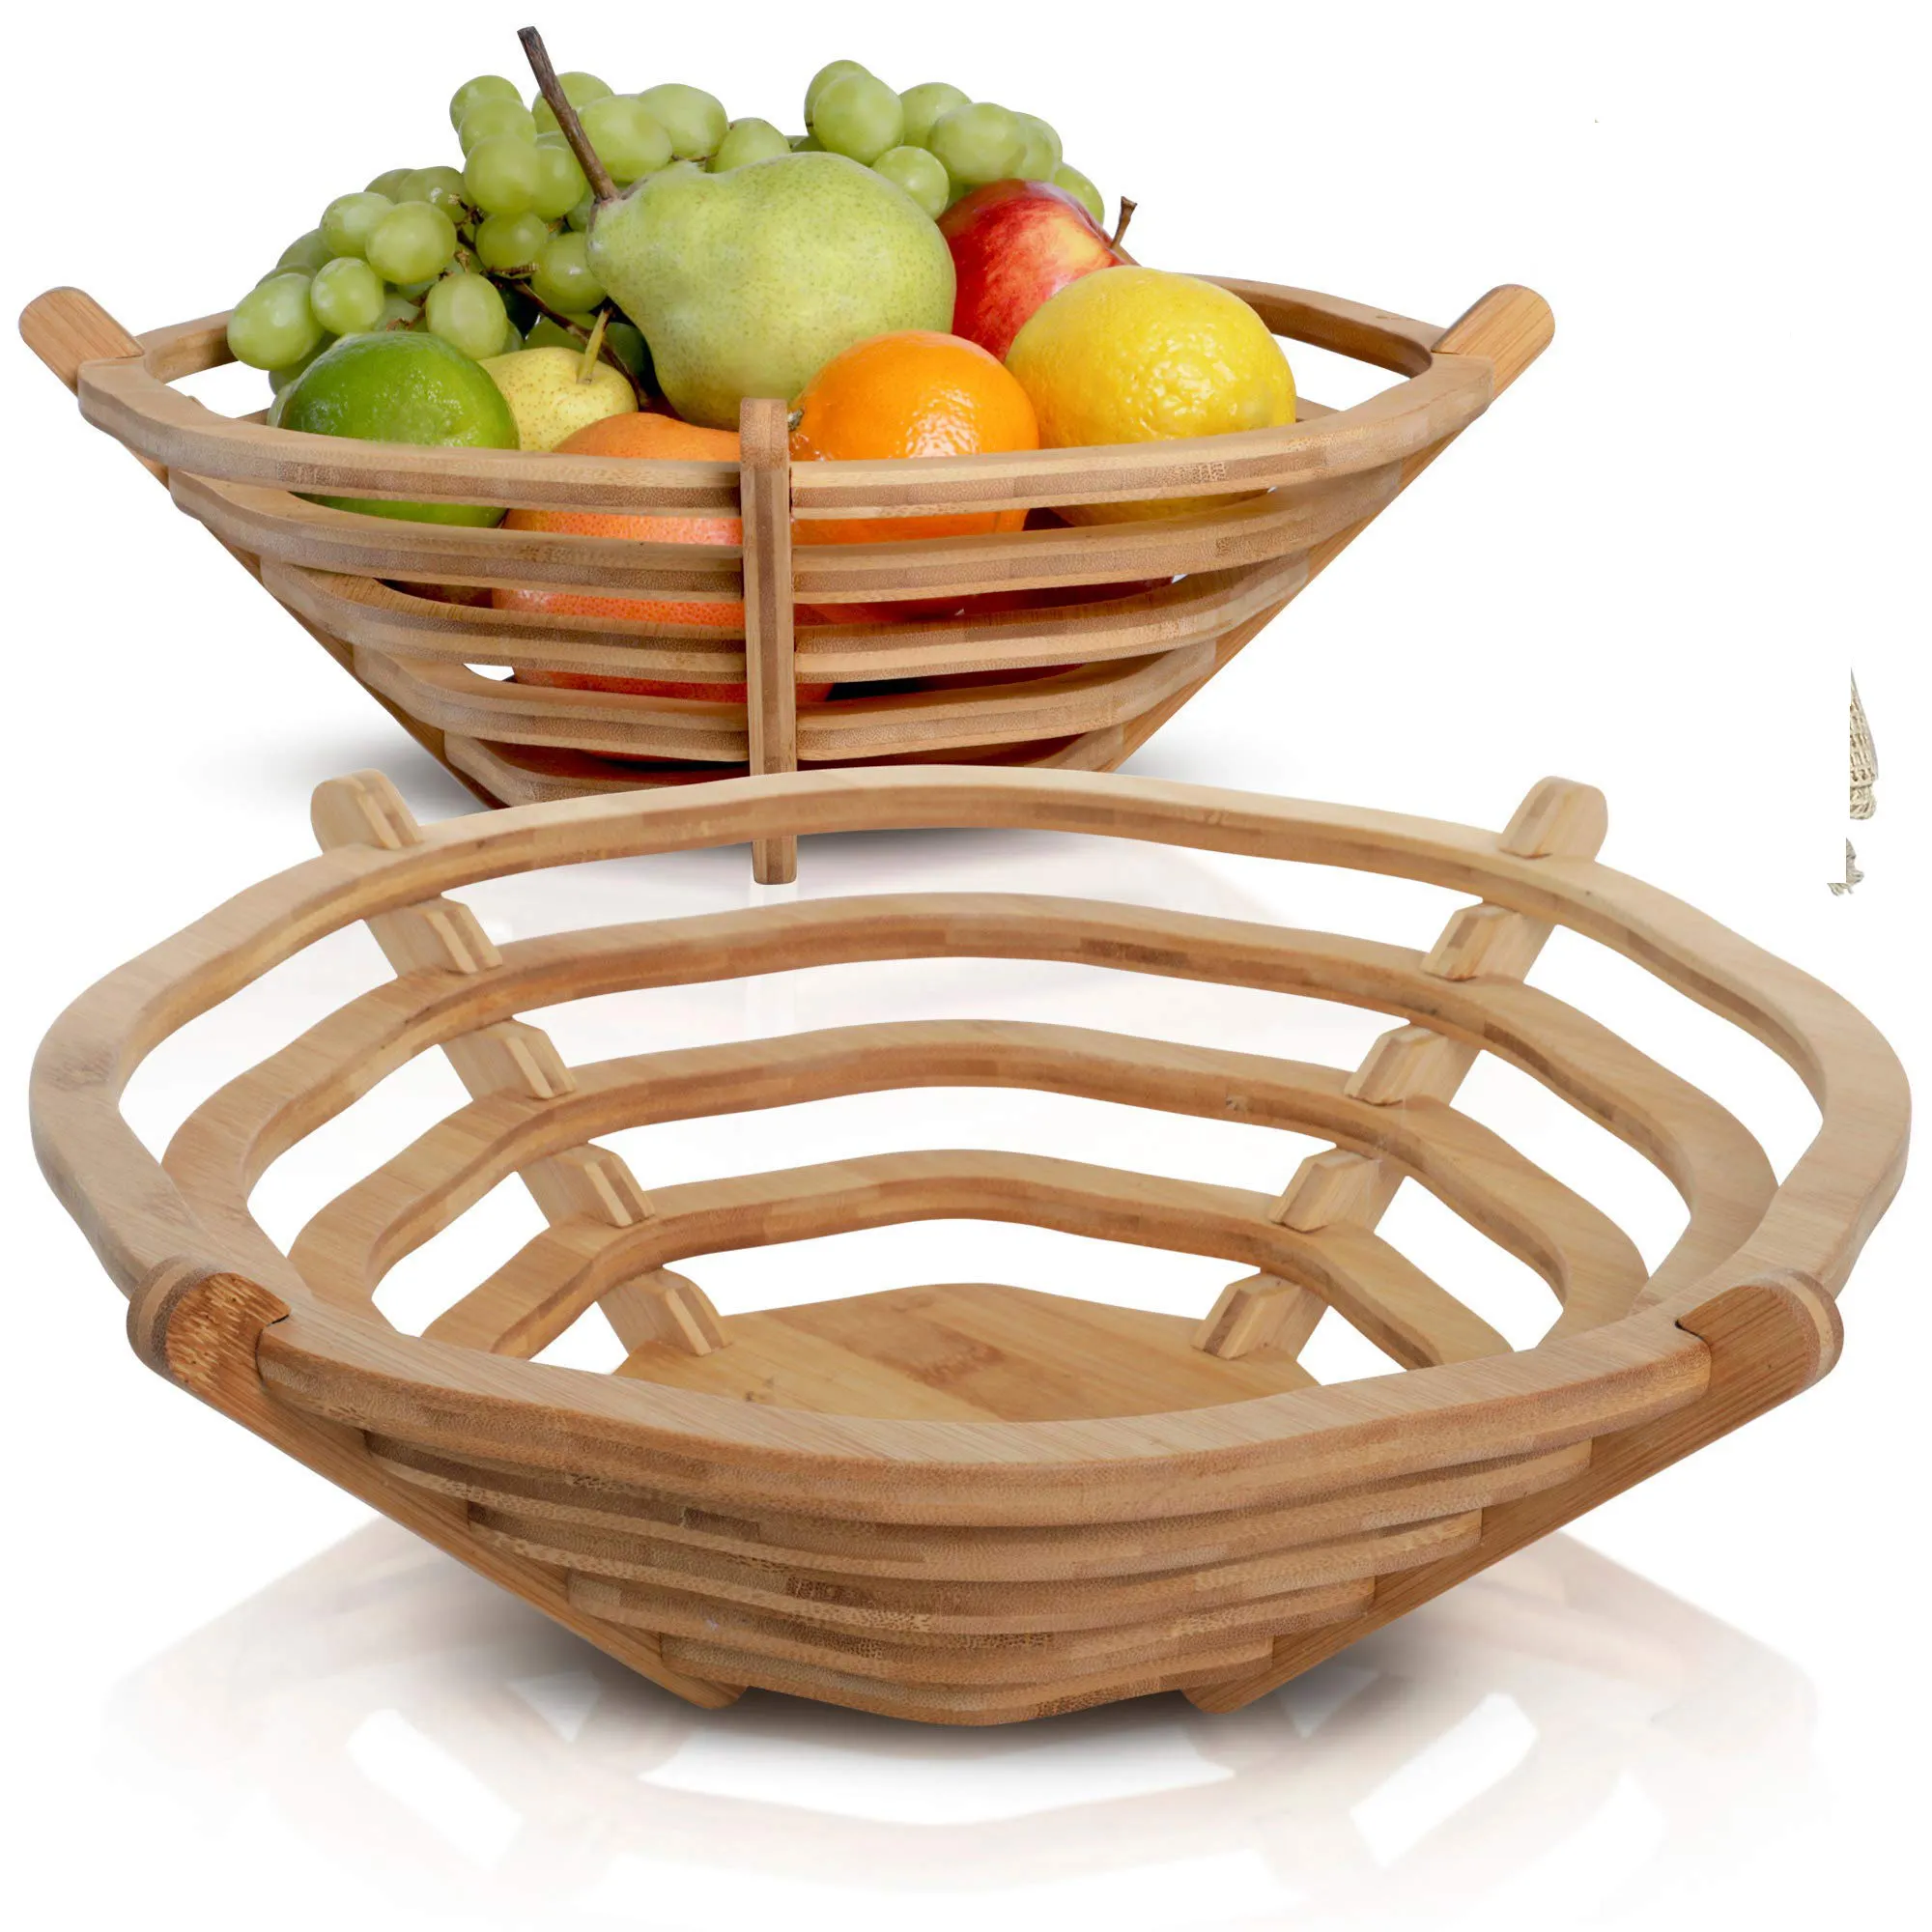 BAMBOO WOOD FRUIT BOWL Beautiful practical statement piece. An ideal pastry, bread or fruit bowl for kitchen counter.